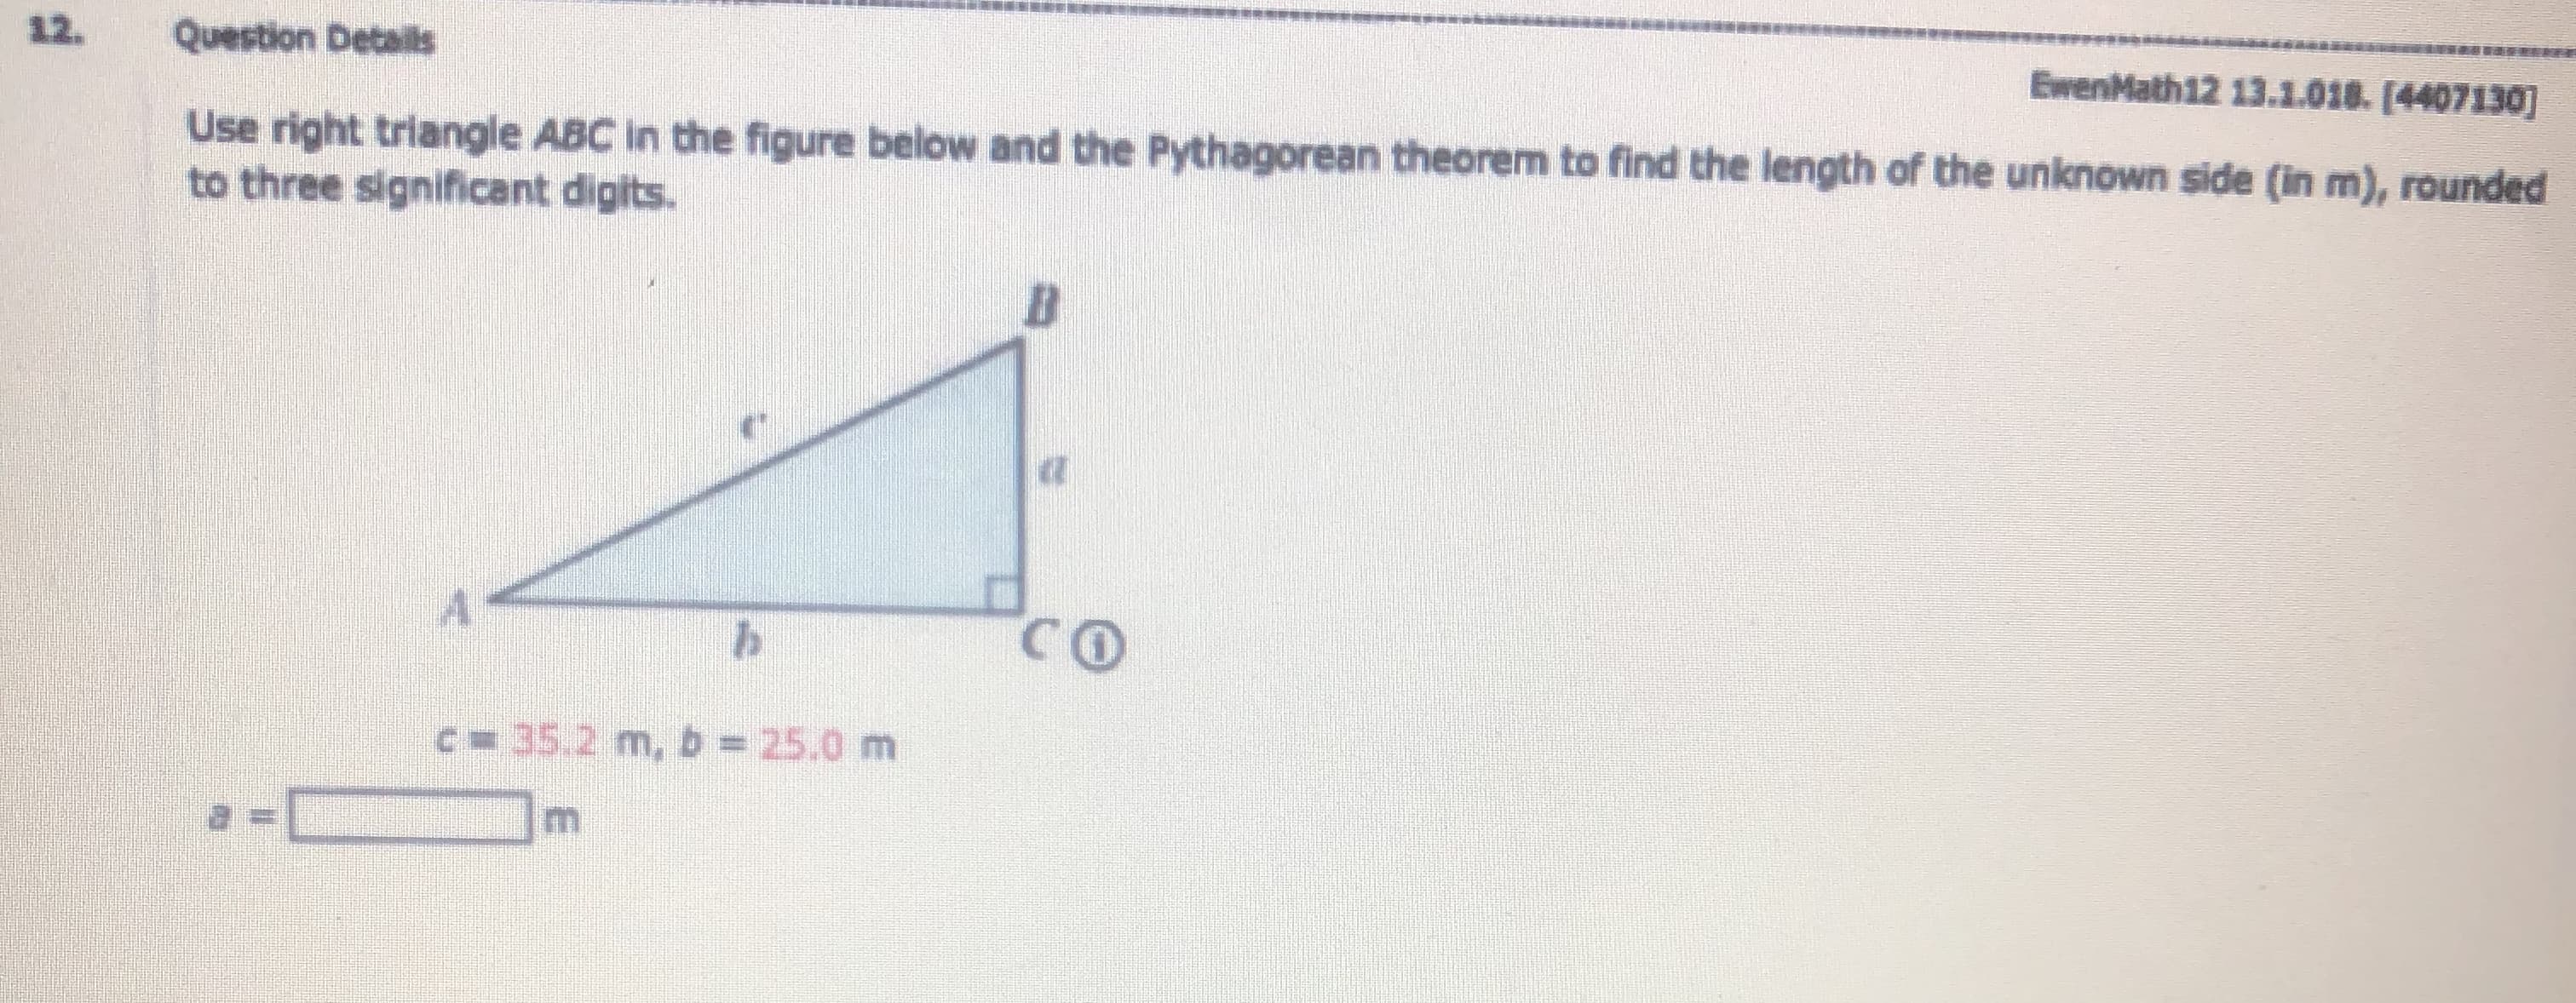 Use right triangle ABC in the figure below and the Pythagorean theorem to find the length of the unknown side (in m), rounded
to three significant digits.
CO
C 35.2 m,b 25.0 m
